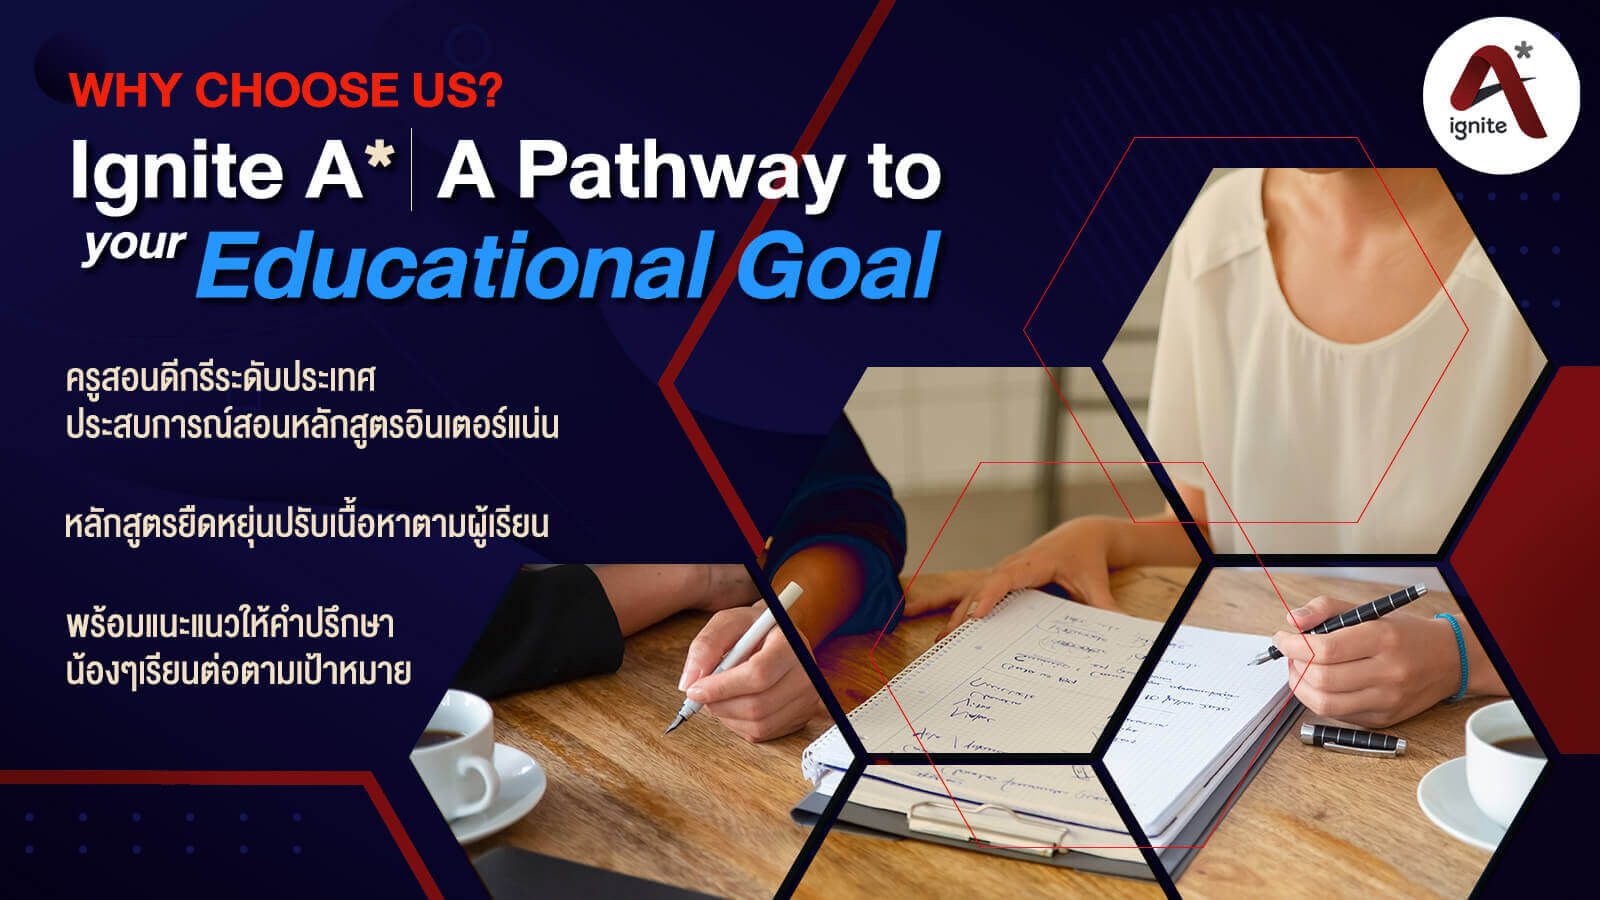 Ignite A star a path way to your educational goal as we are the leading tutoring school for international students.